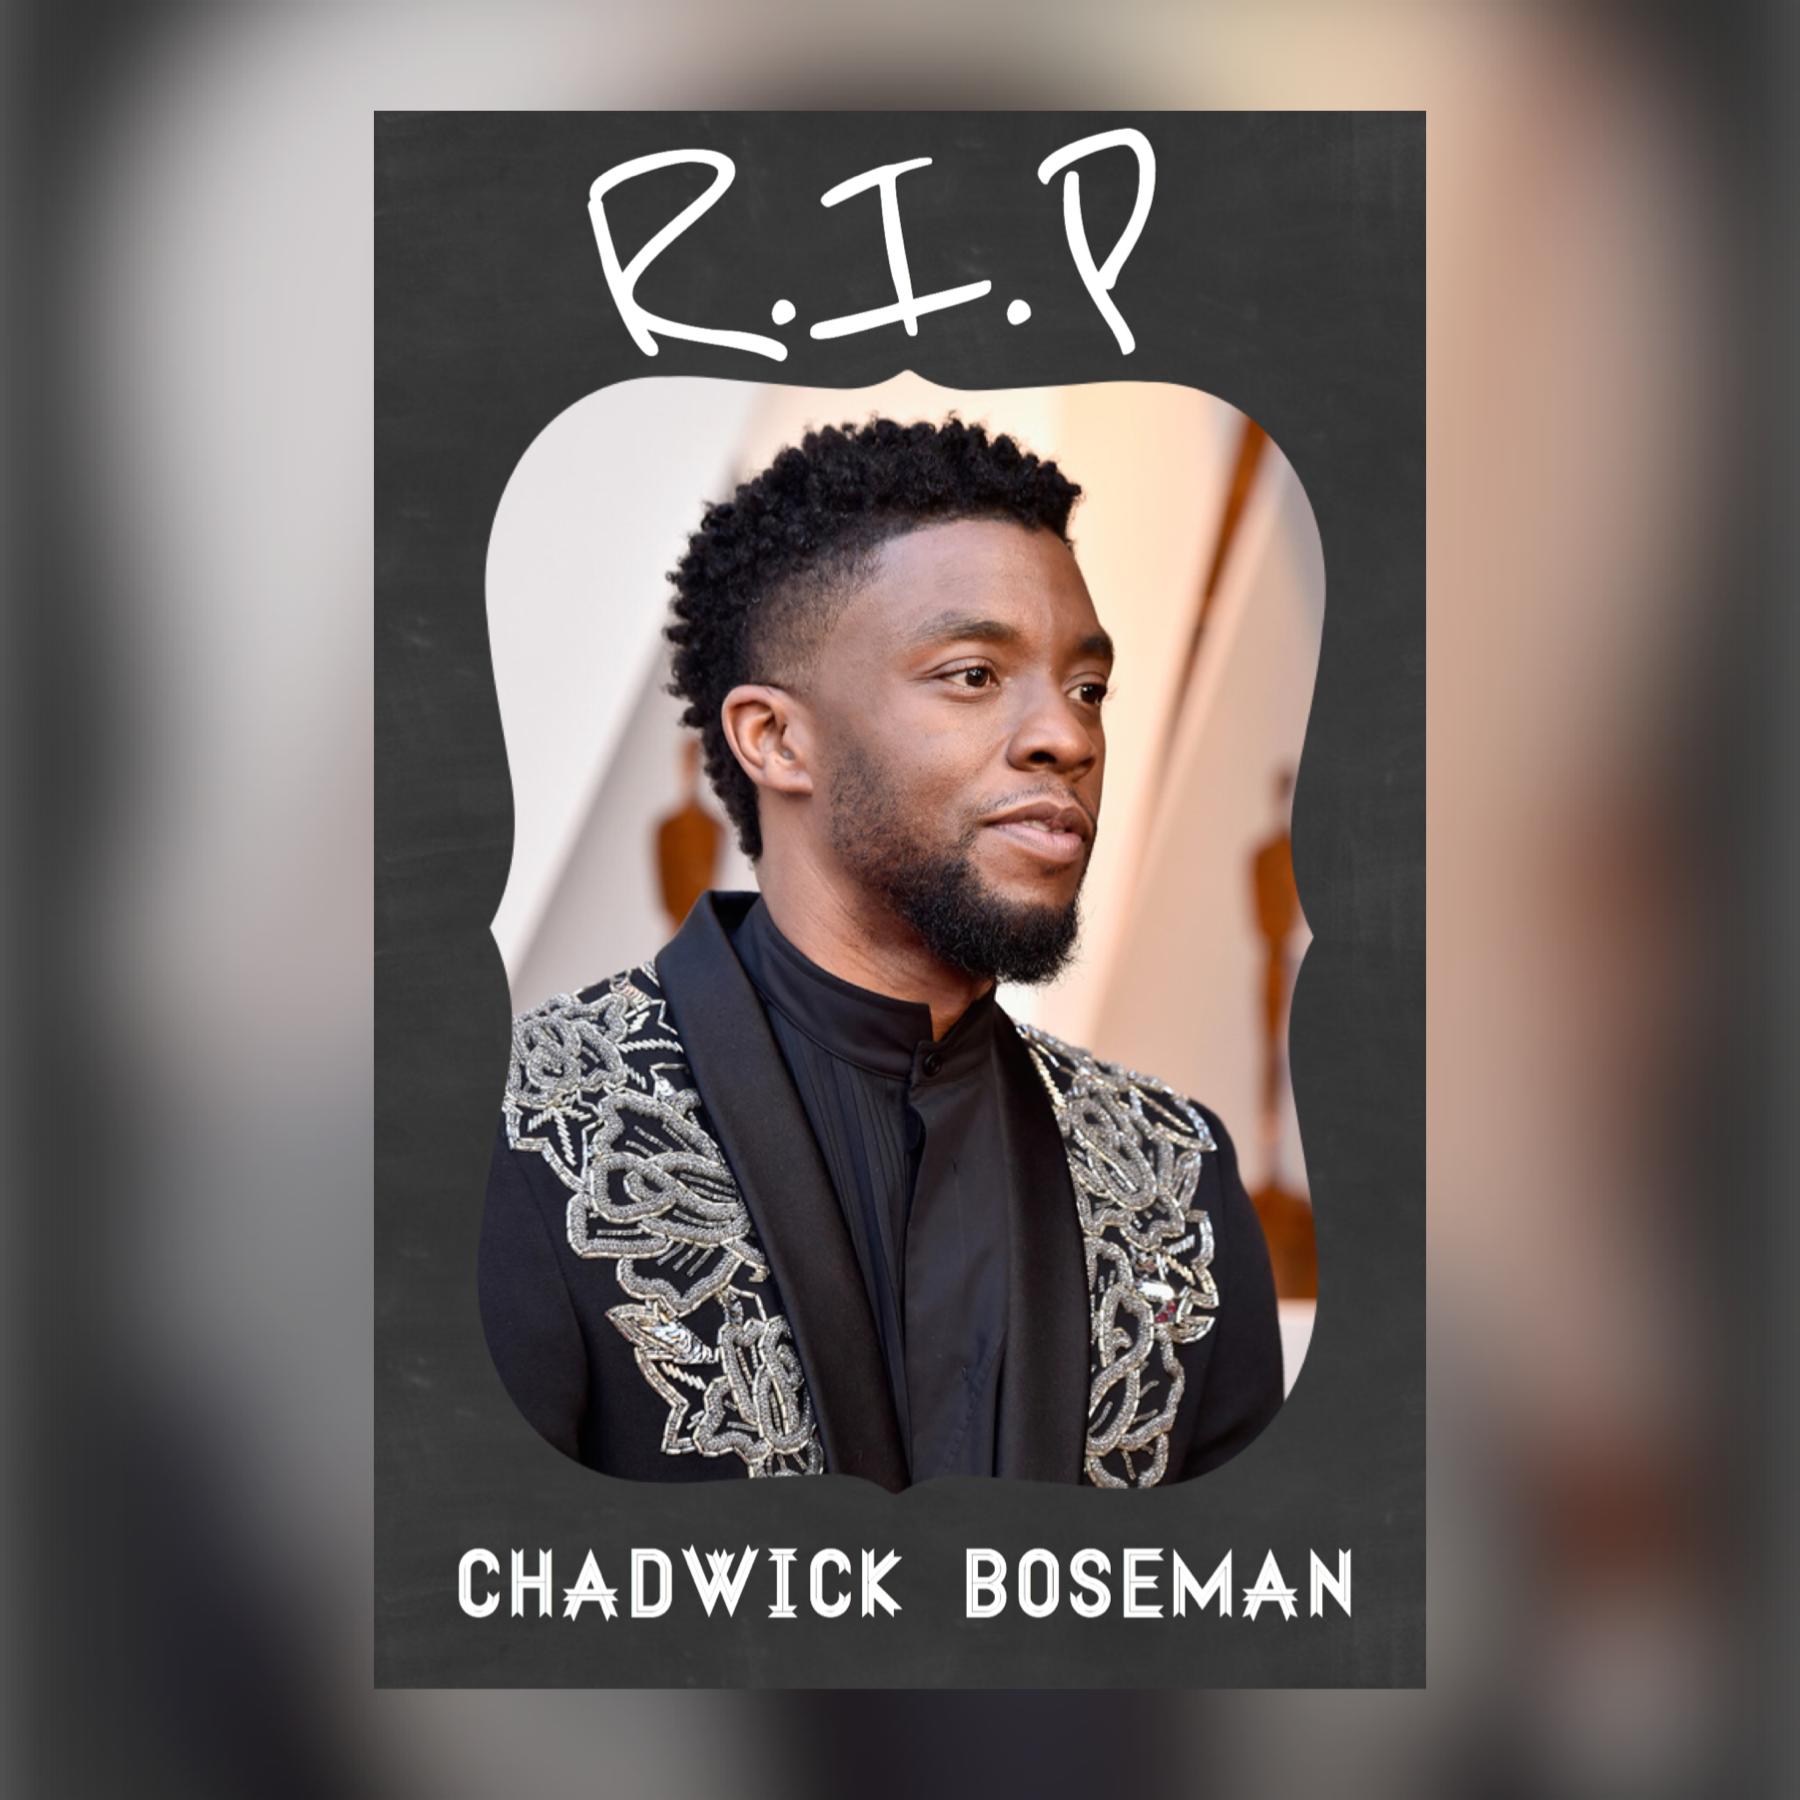 So tragic. May he Rest In Peace. 
Wakanda Forever. 